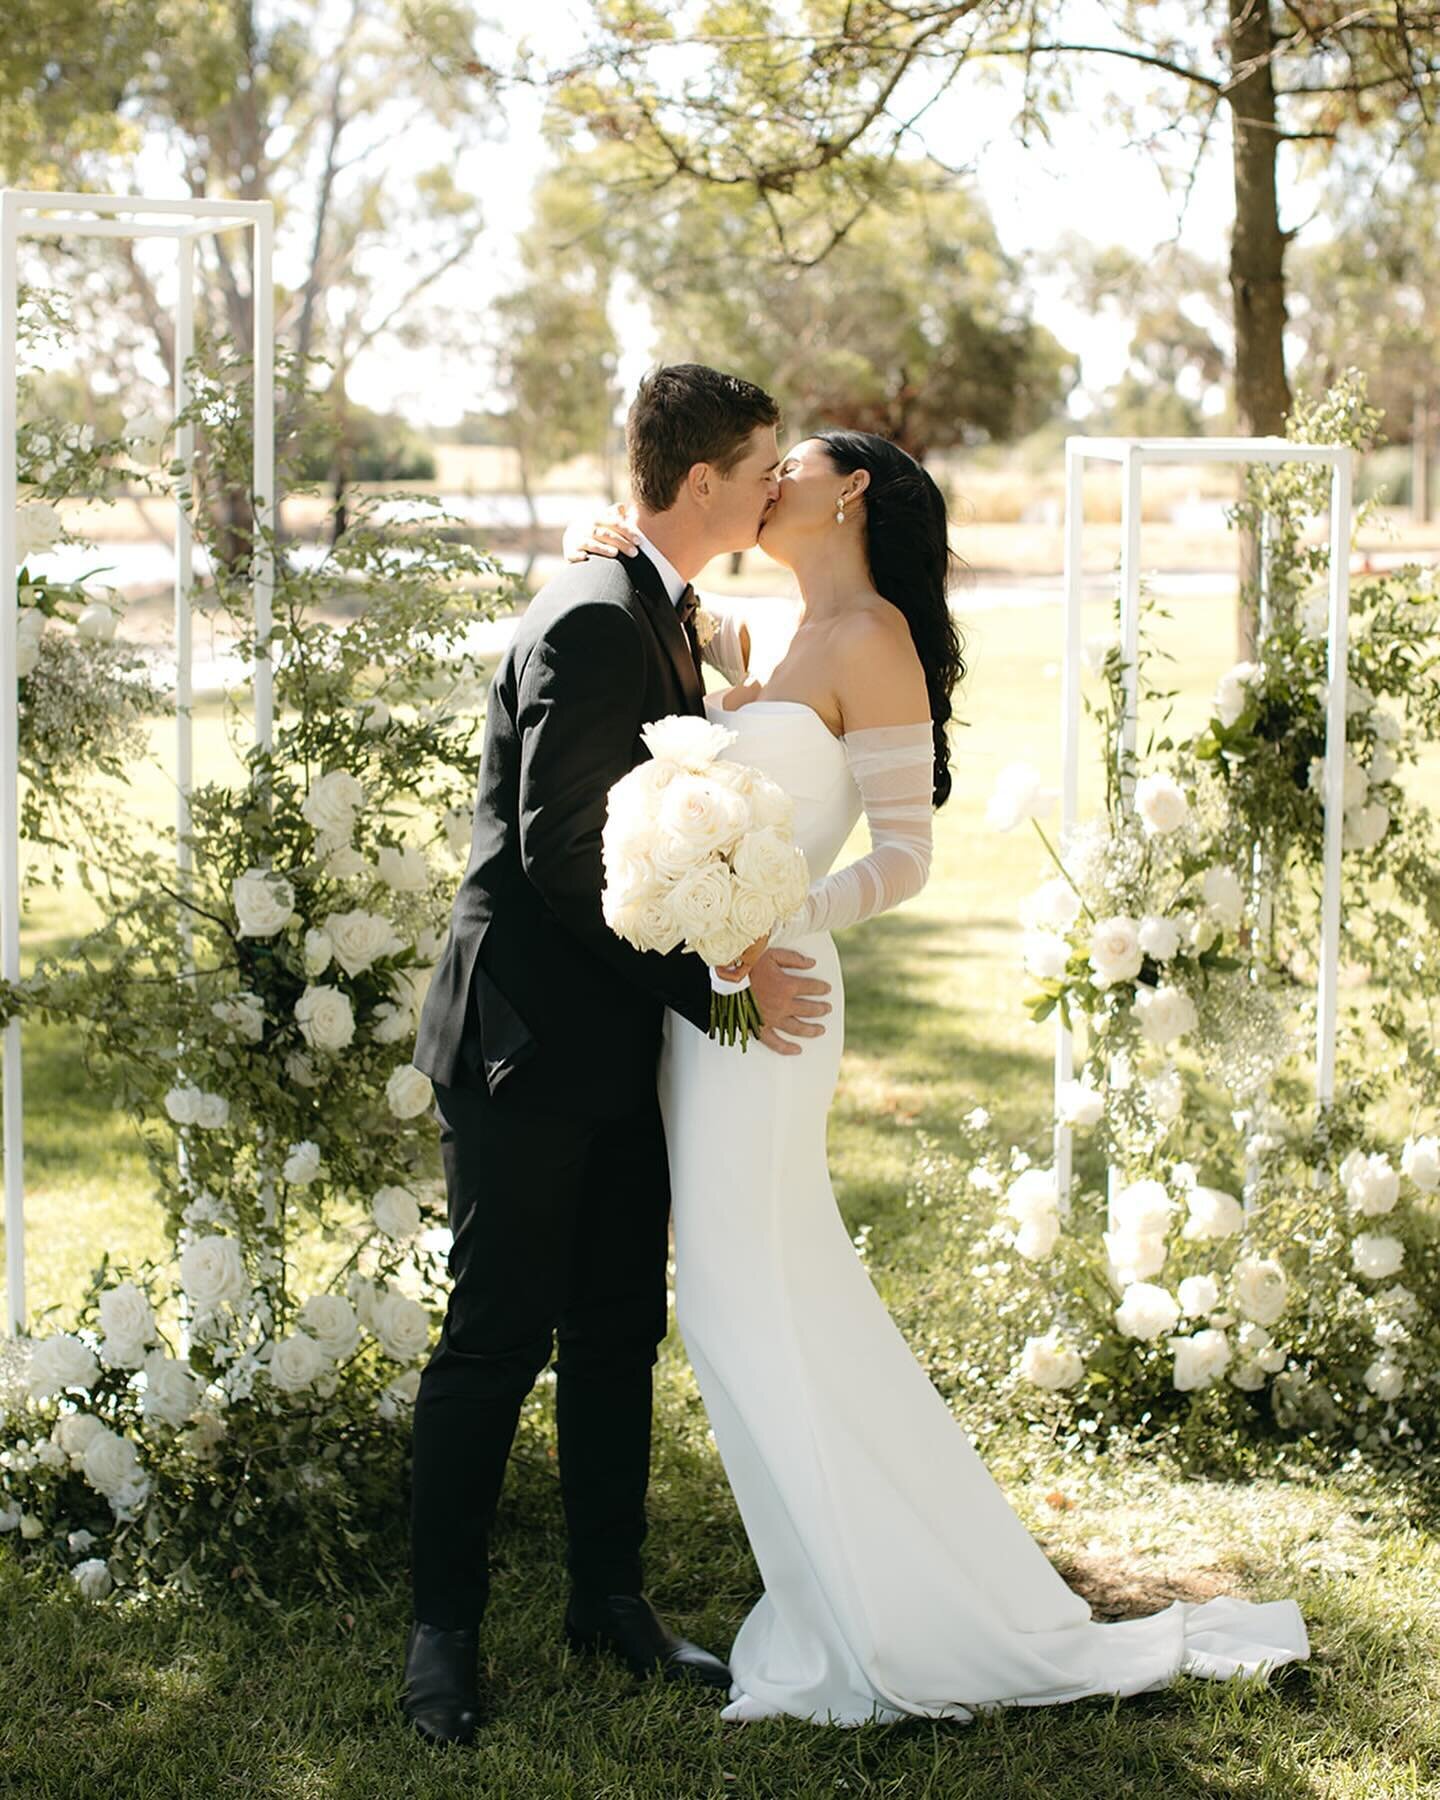 Stacey and Darcy and their beautiful homestead wedding ~ 

A picturesque garden oasis for their ceremony followed by a champagne filled canap&eacute; hr and candle lit reception. Magic!

Captured through the lens of the talented Christian at @whitesa